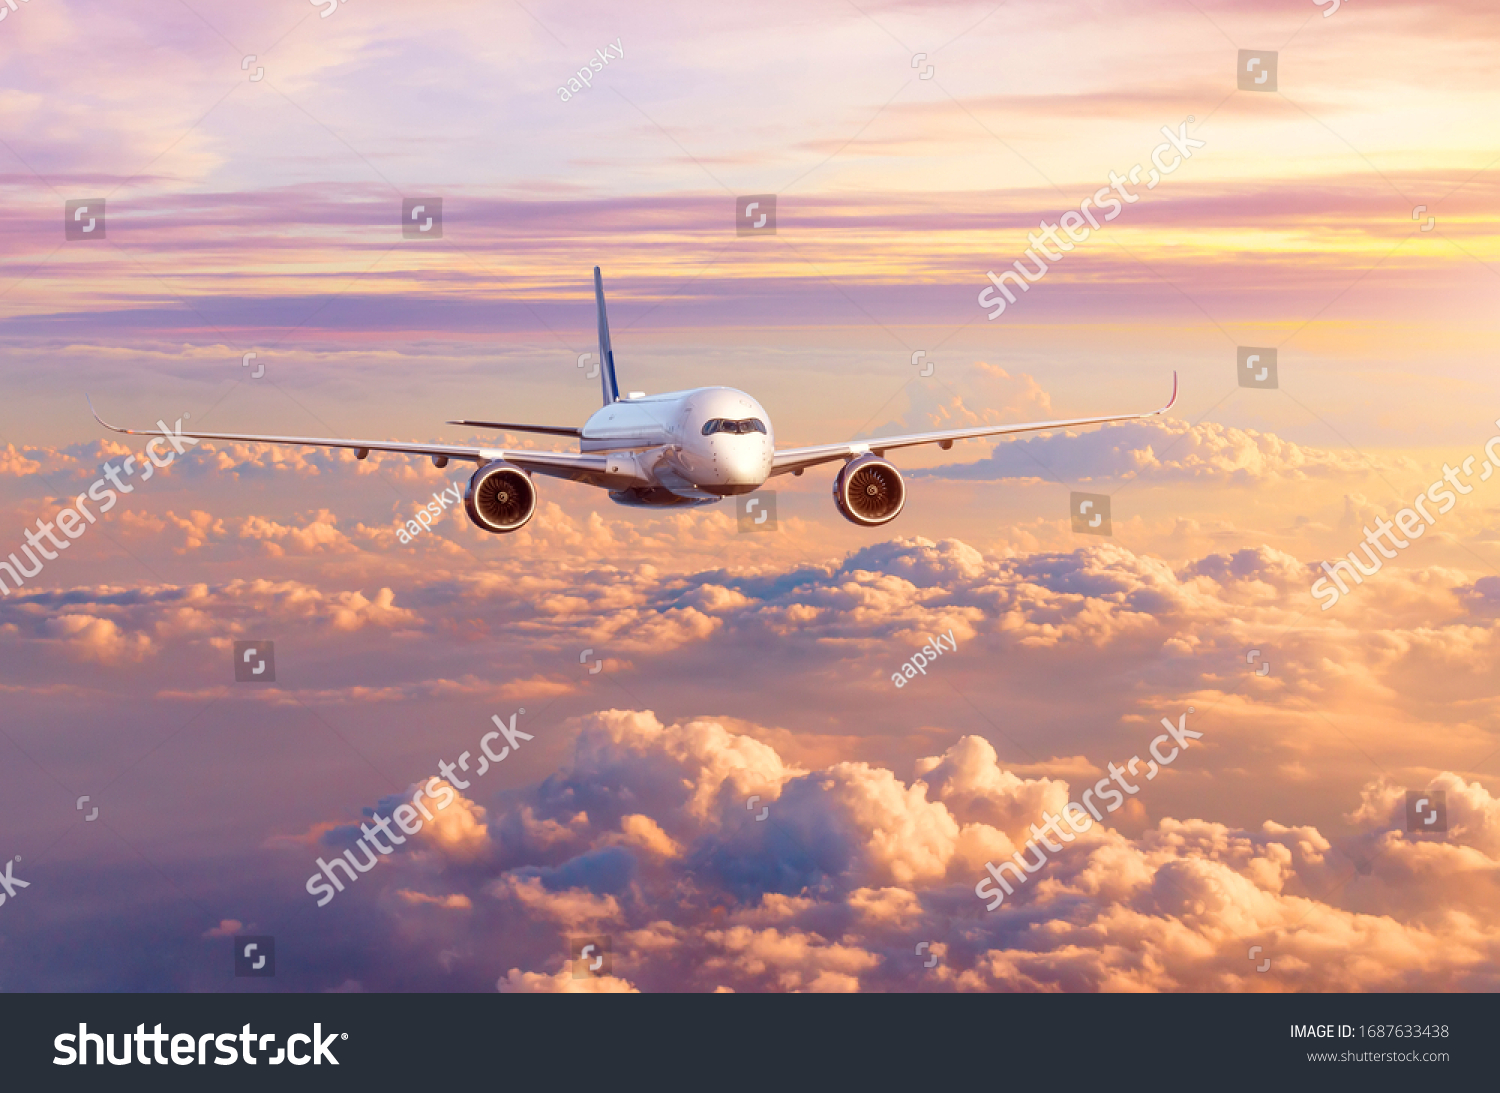 Airplane airliner flies over beautiful evening clouds, in the sky at sunset #1687633438